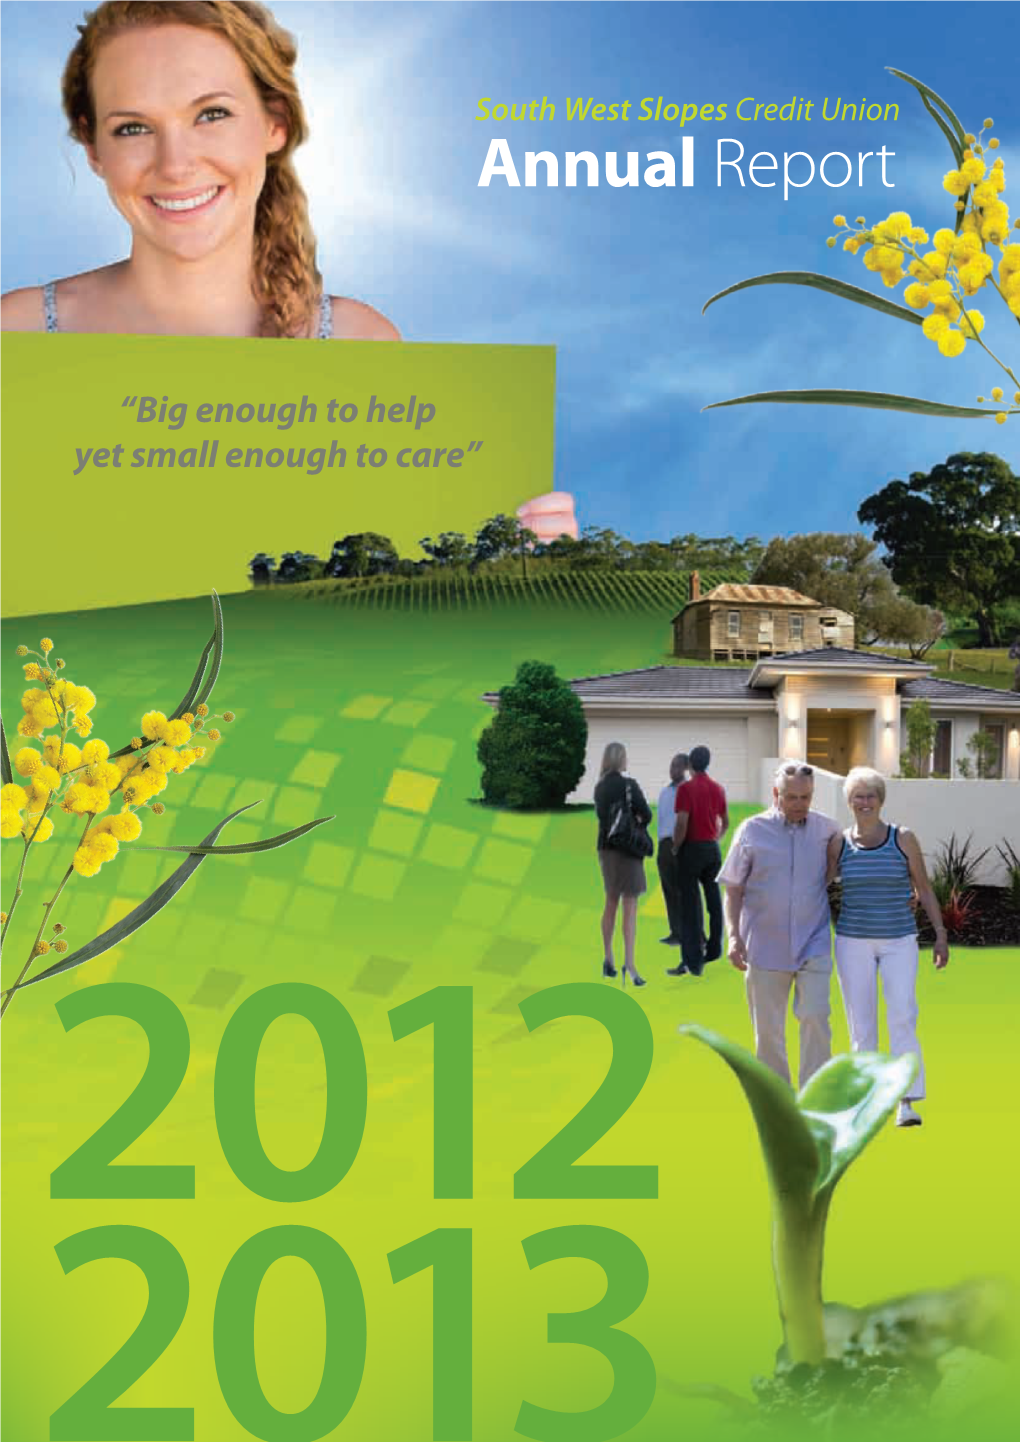 South West Slopes Credit Union Annual Report